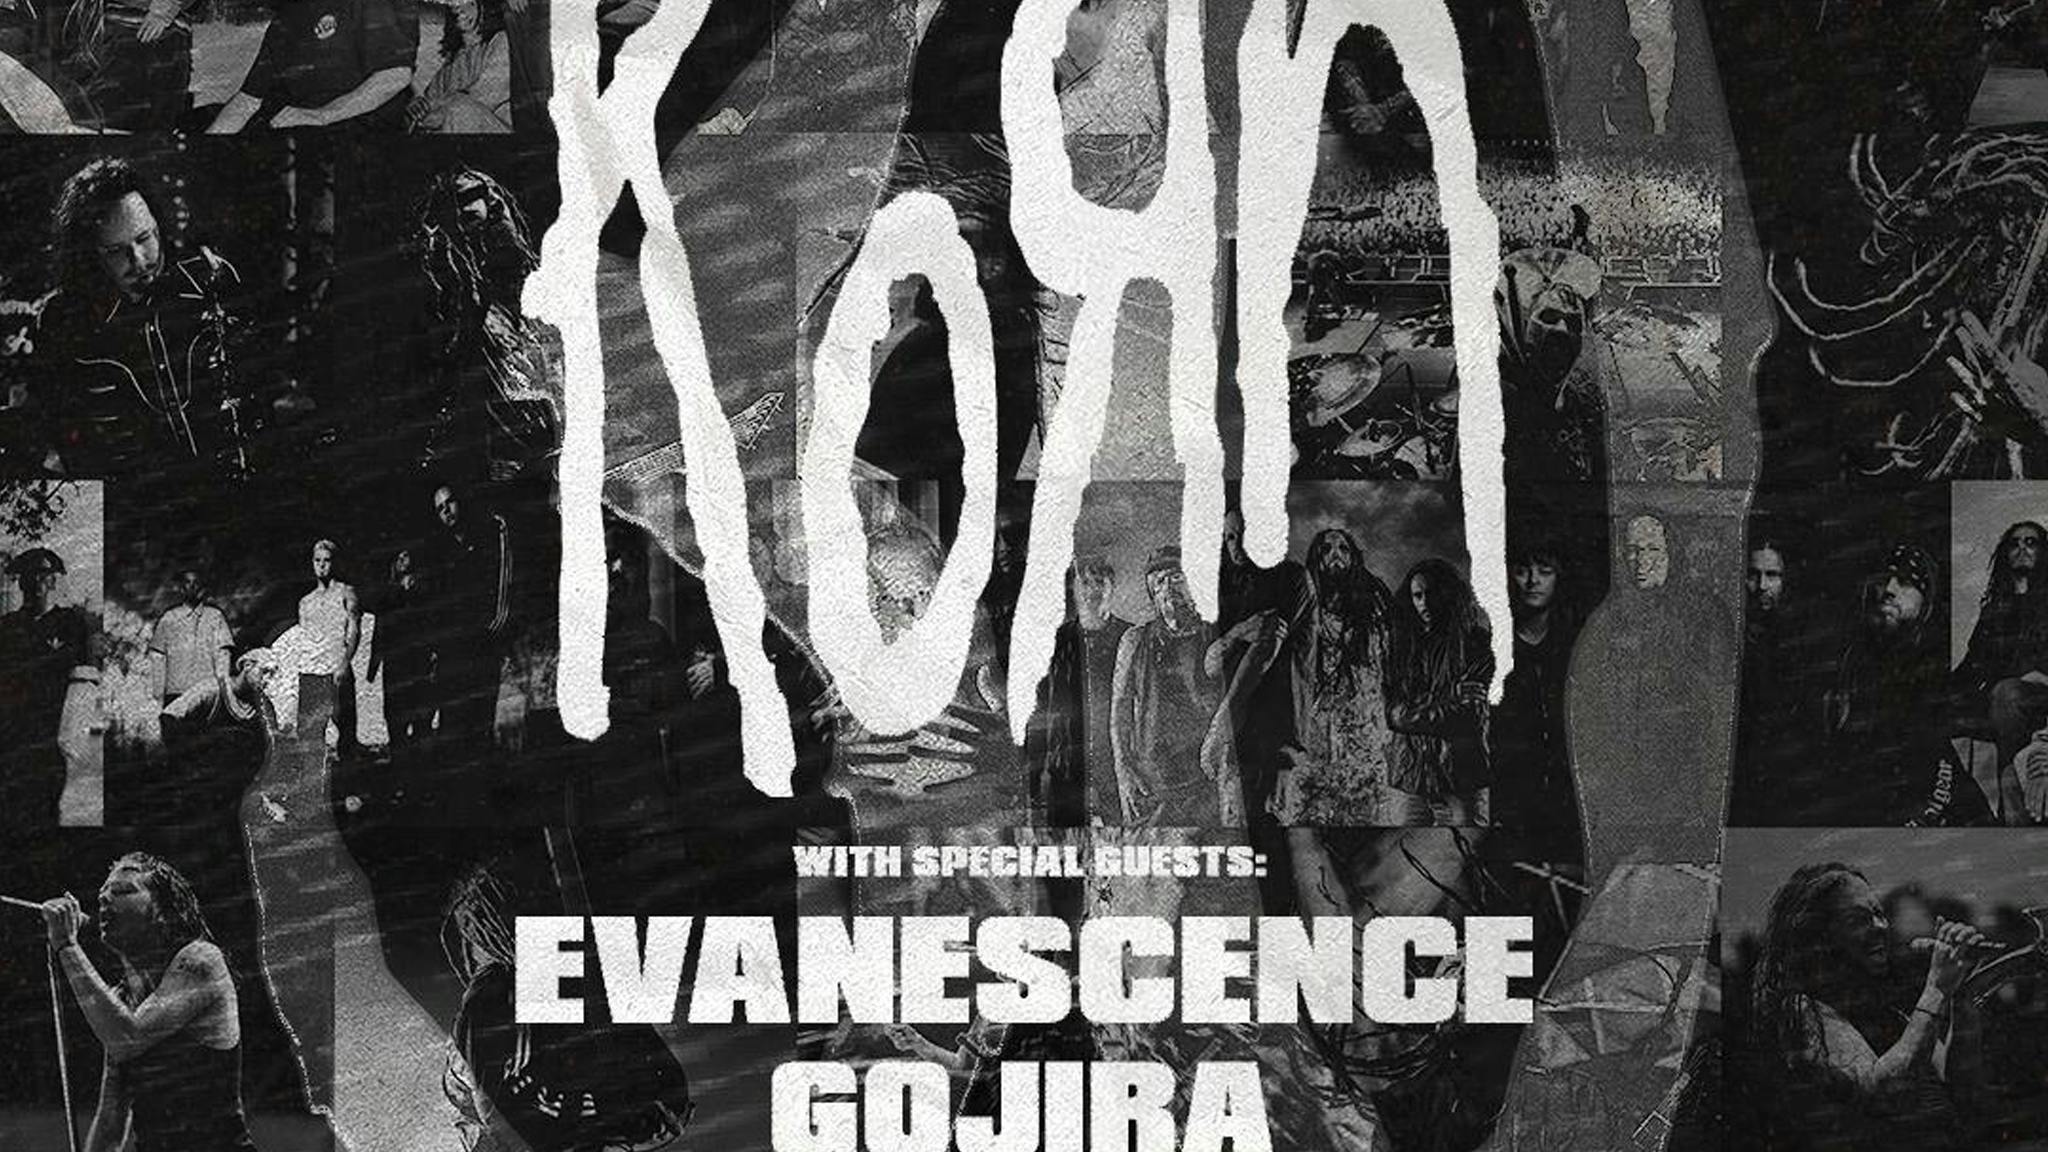 Korn confirm 30th anniversary stadium show with Evanescence, Gojira, Scars On Broadway and more